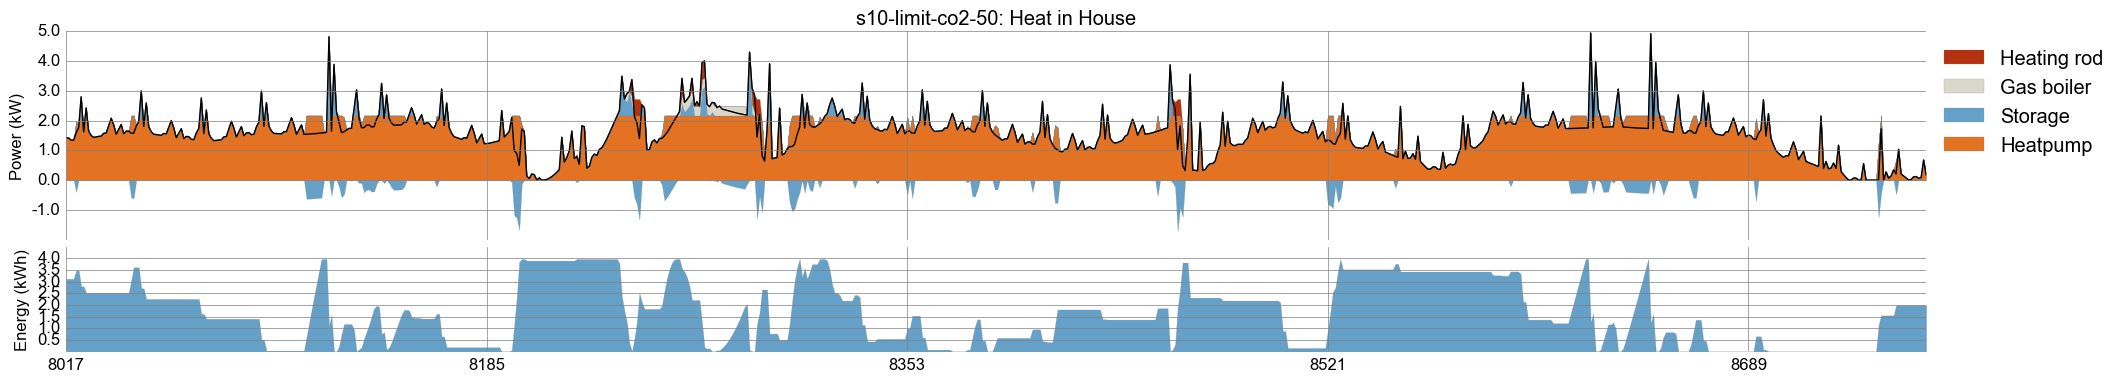 Timeseries plot of month December for heat generation in scenario s10: CO2 limit 50%